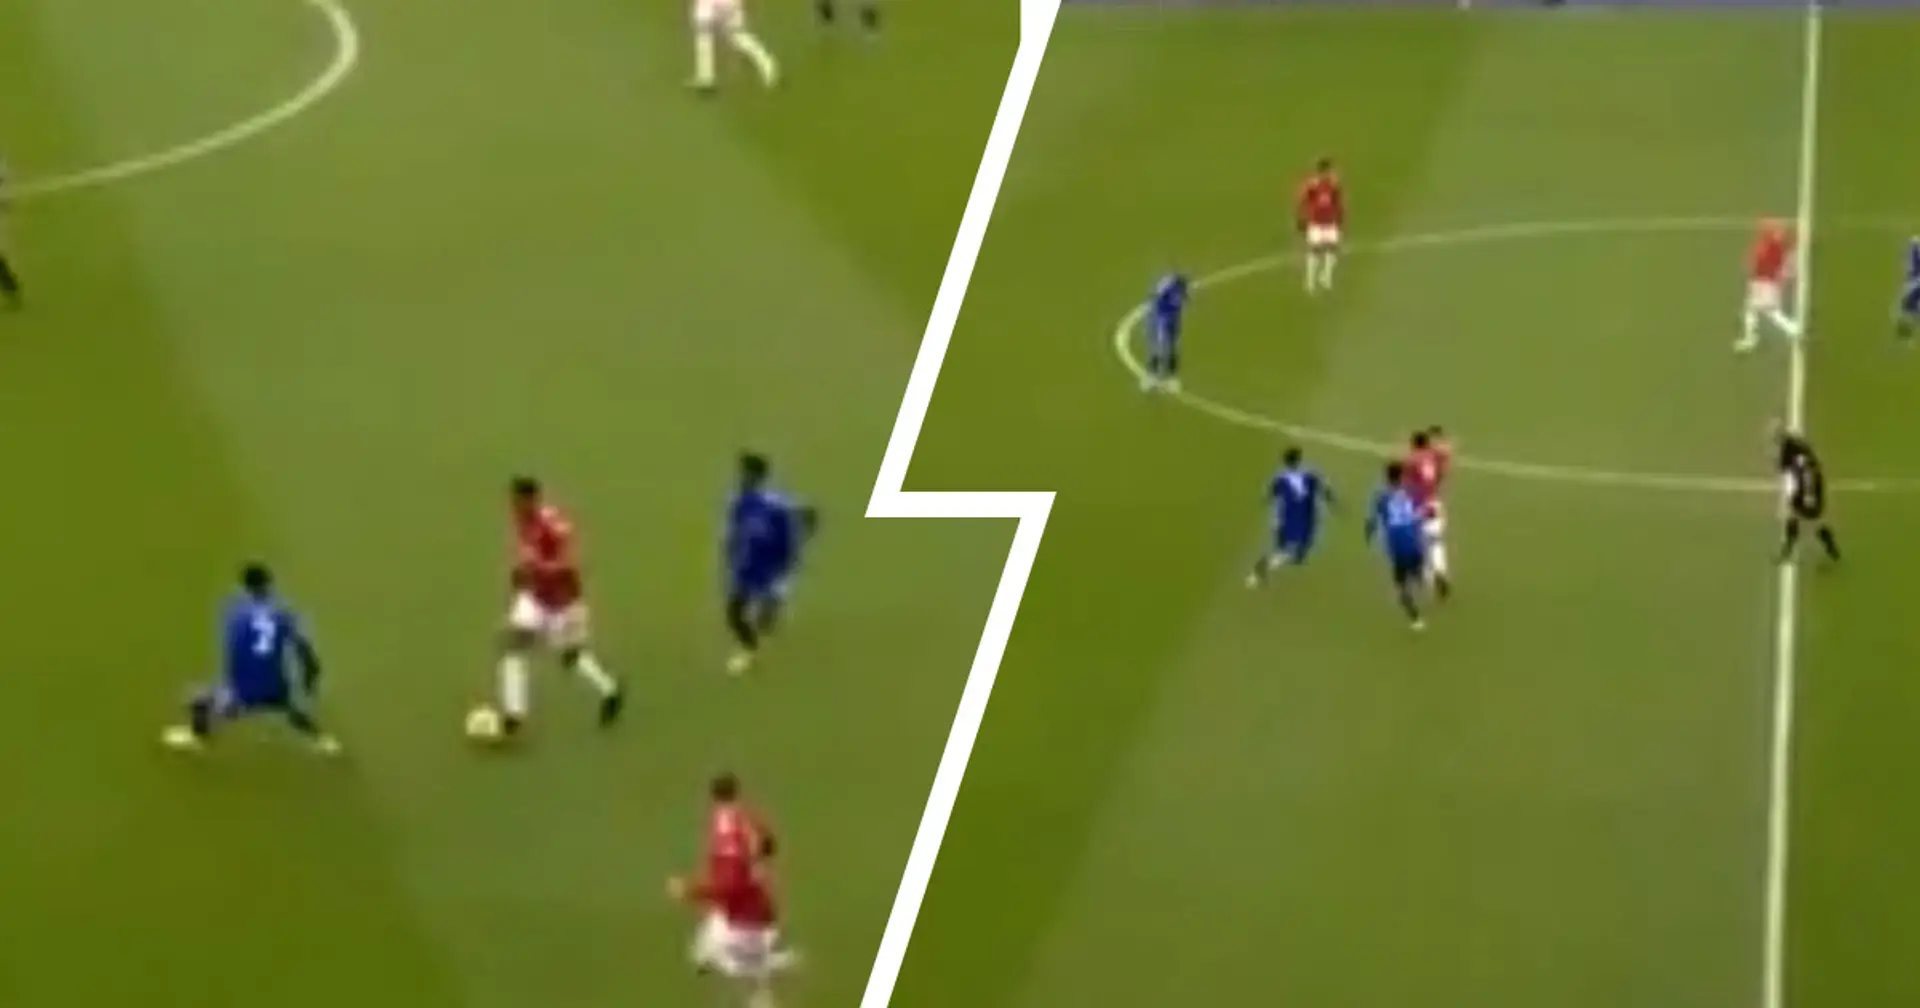 Martial proves his class with brilliant dribble run past multiple Leicester defenders